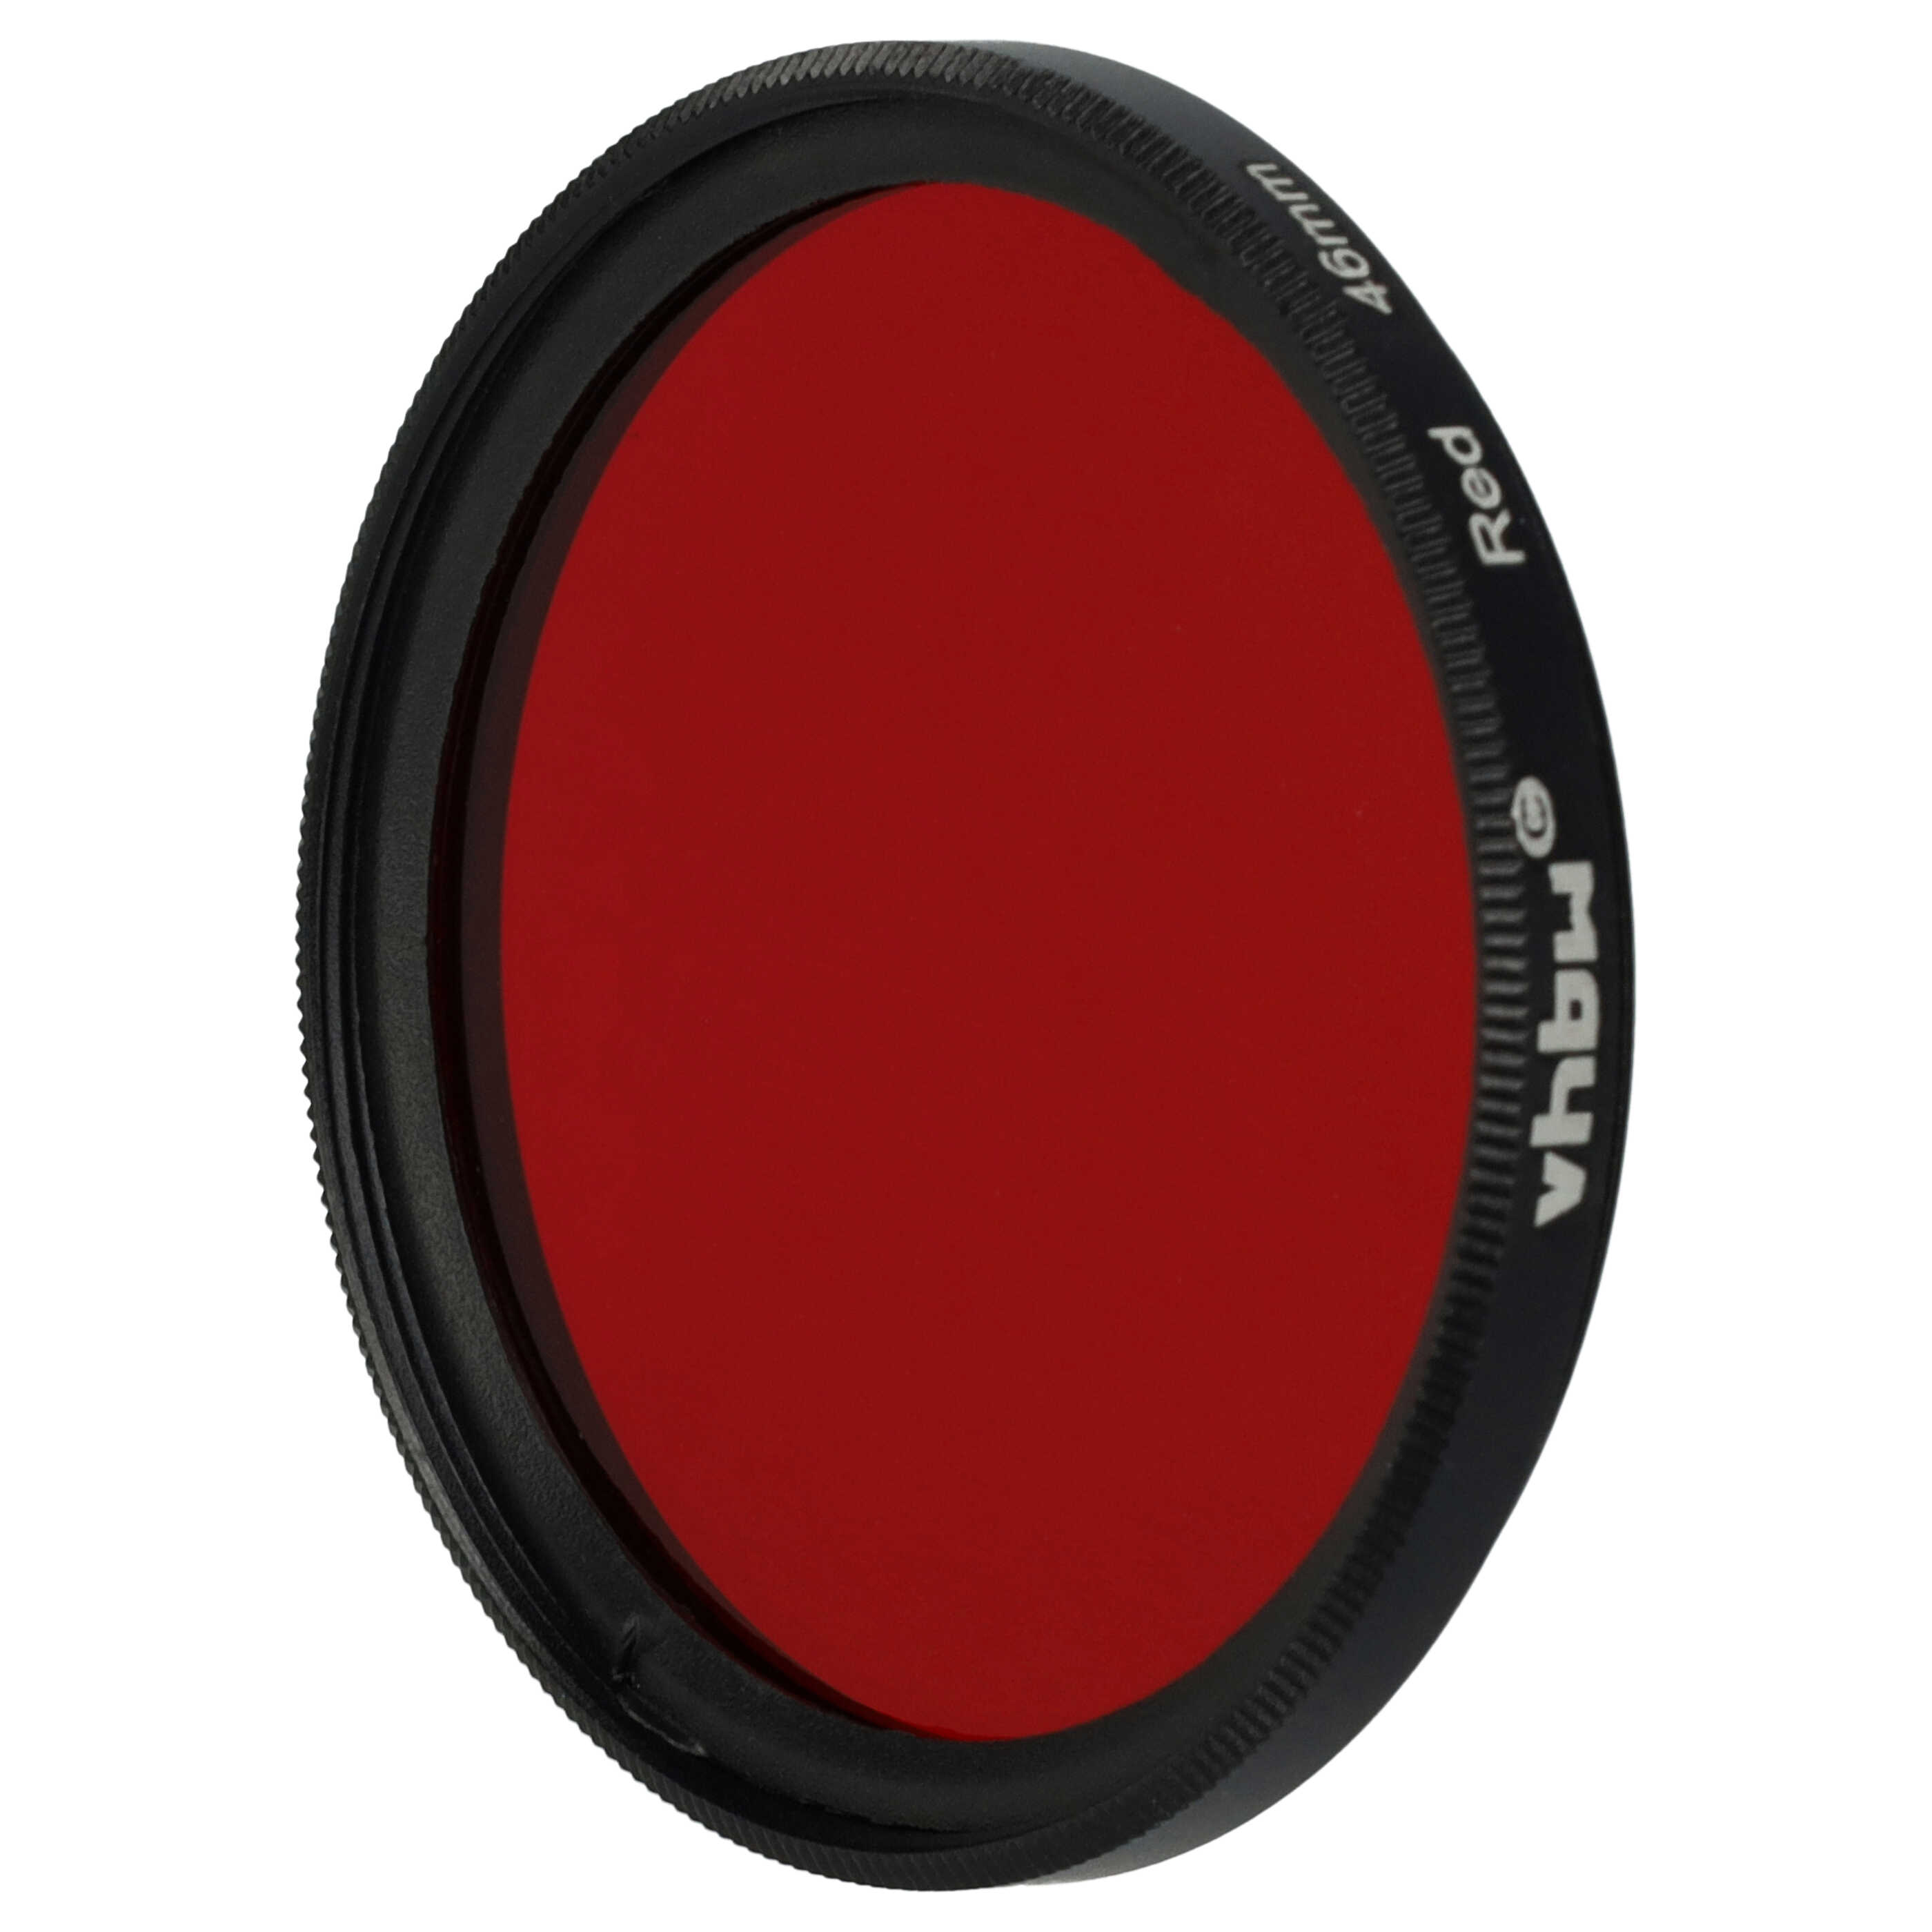 Coloured Filter, Red suitable for Camera Lenses with 46 mm Filter Thread - Red Filter